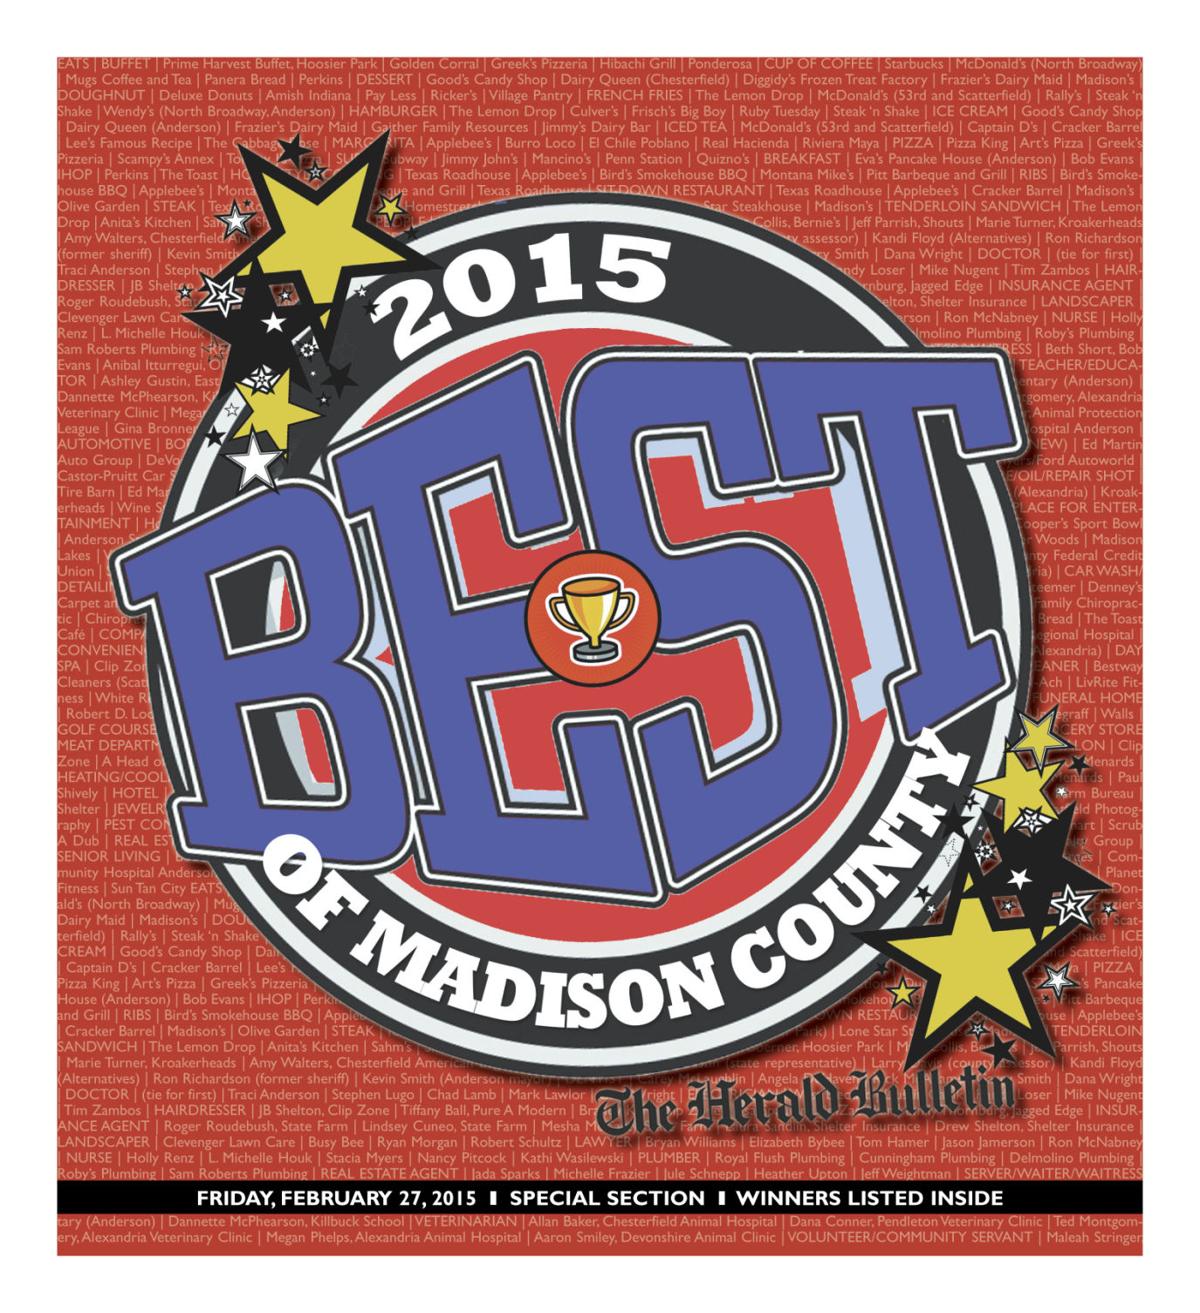 Best of Madison County 2015 Entertainment